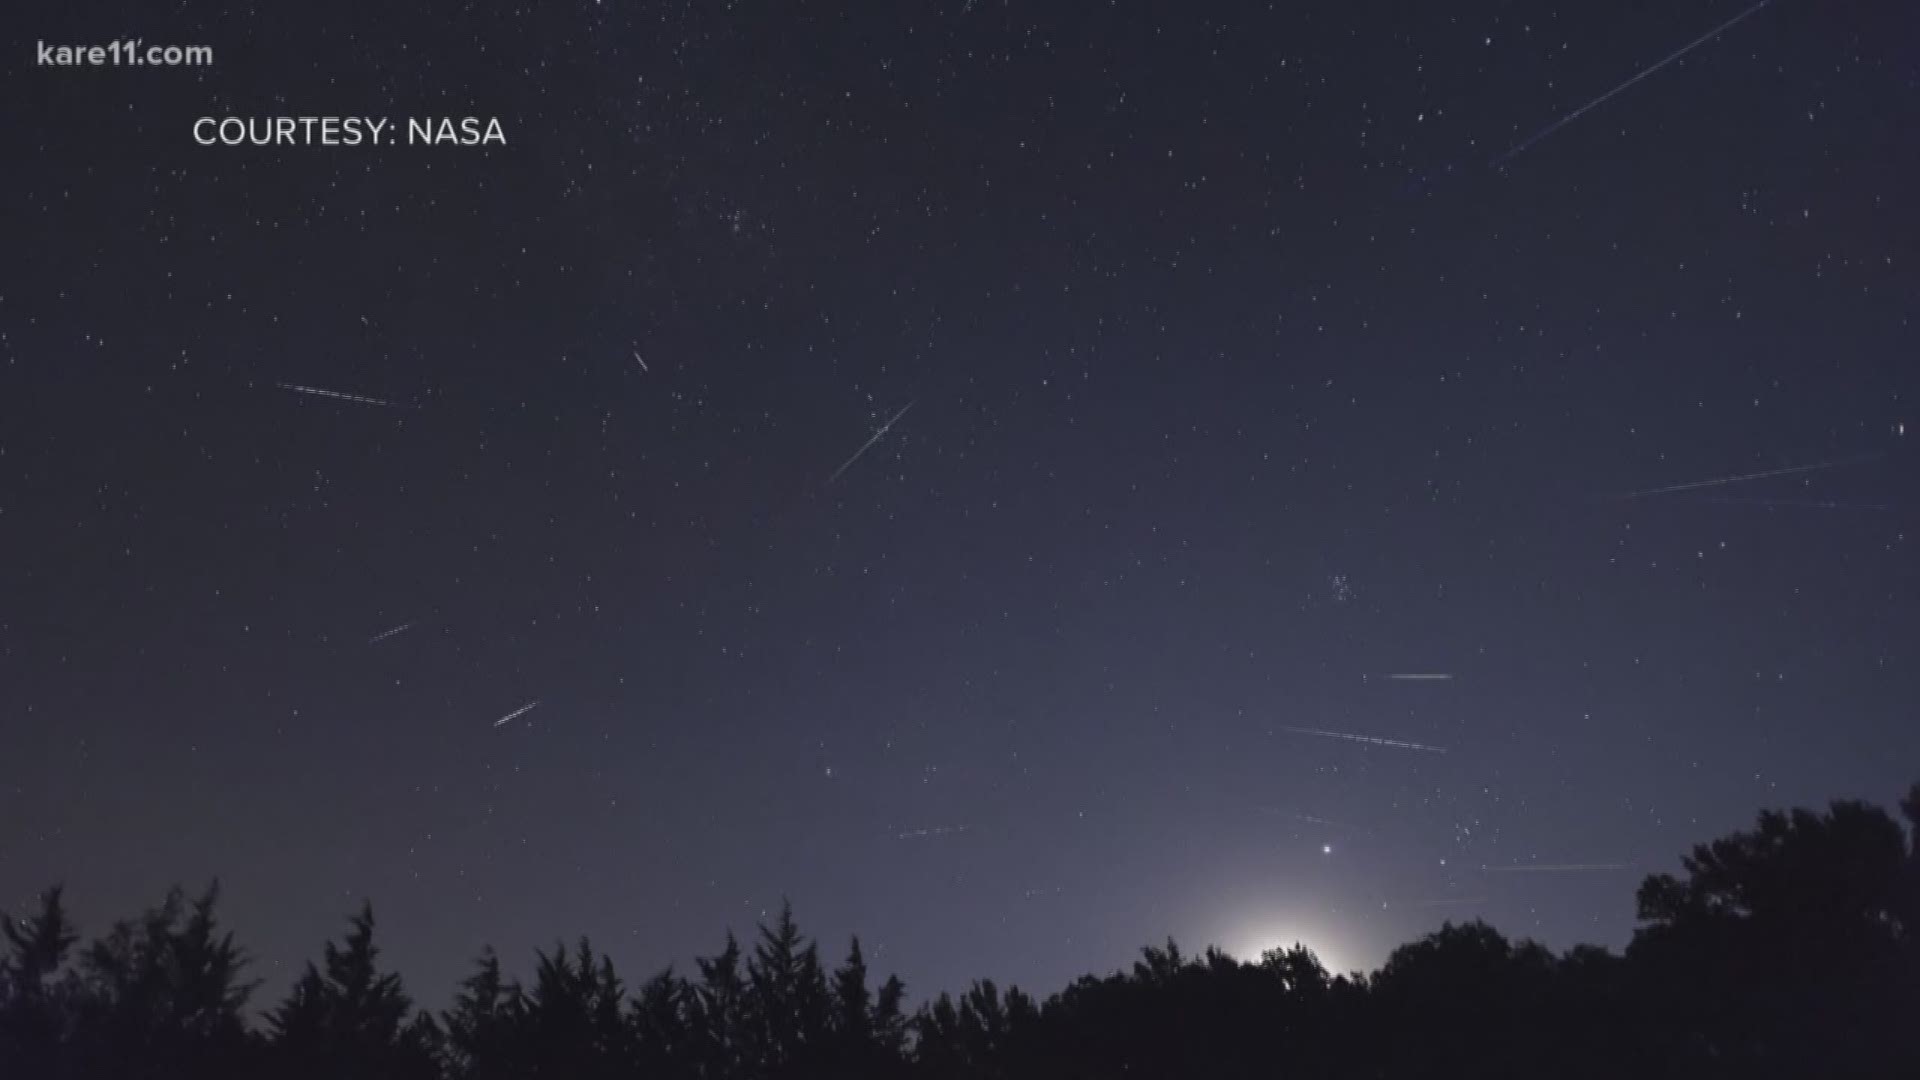 This Saturday night you will want to keep your eyes peeled for the annual Leonid meteor shower